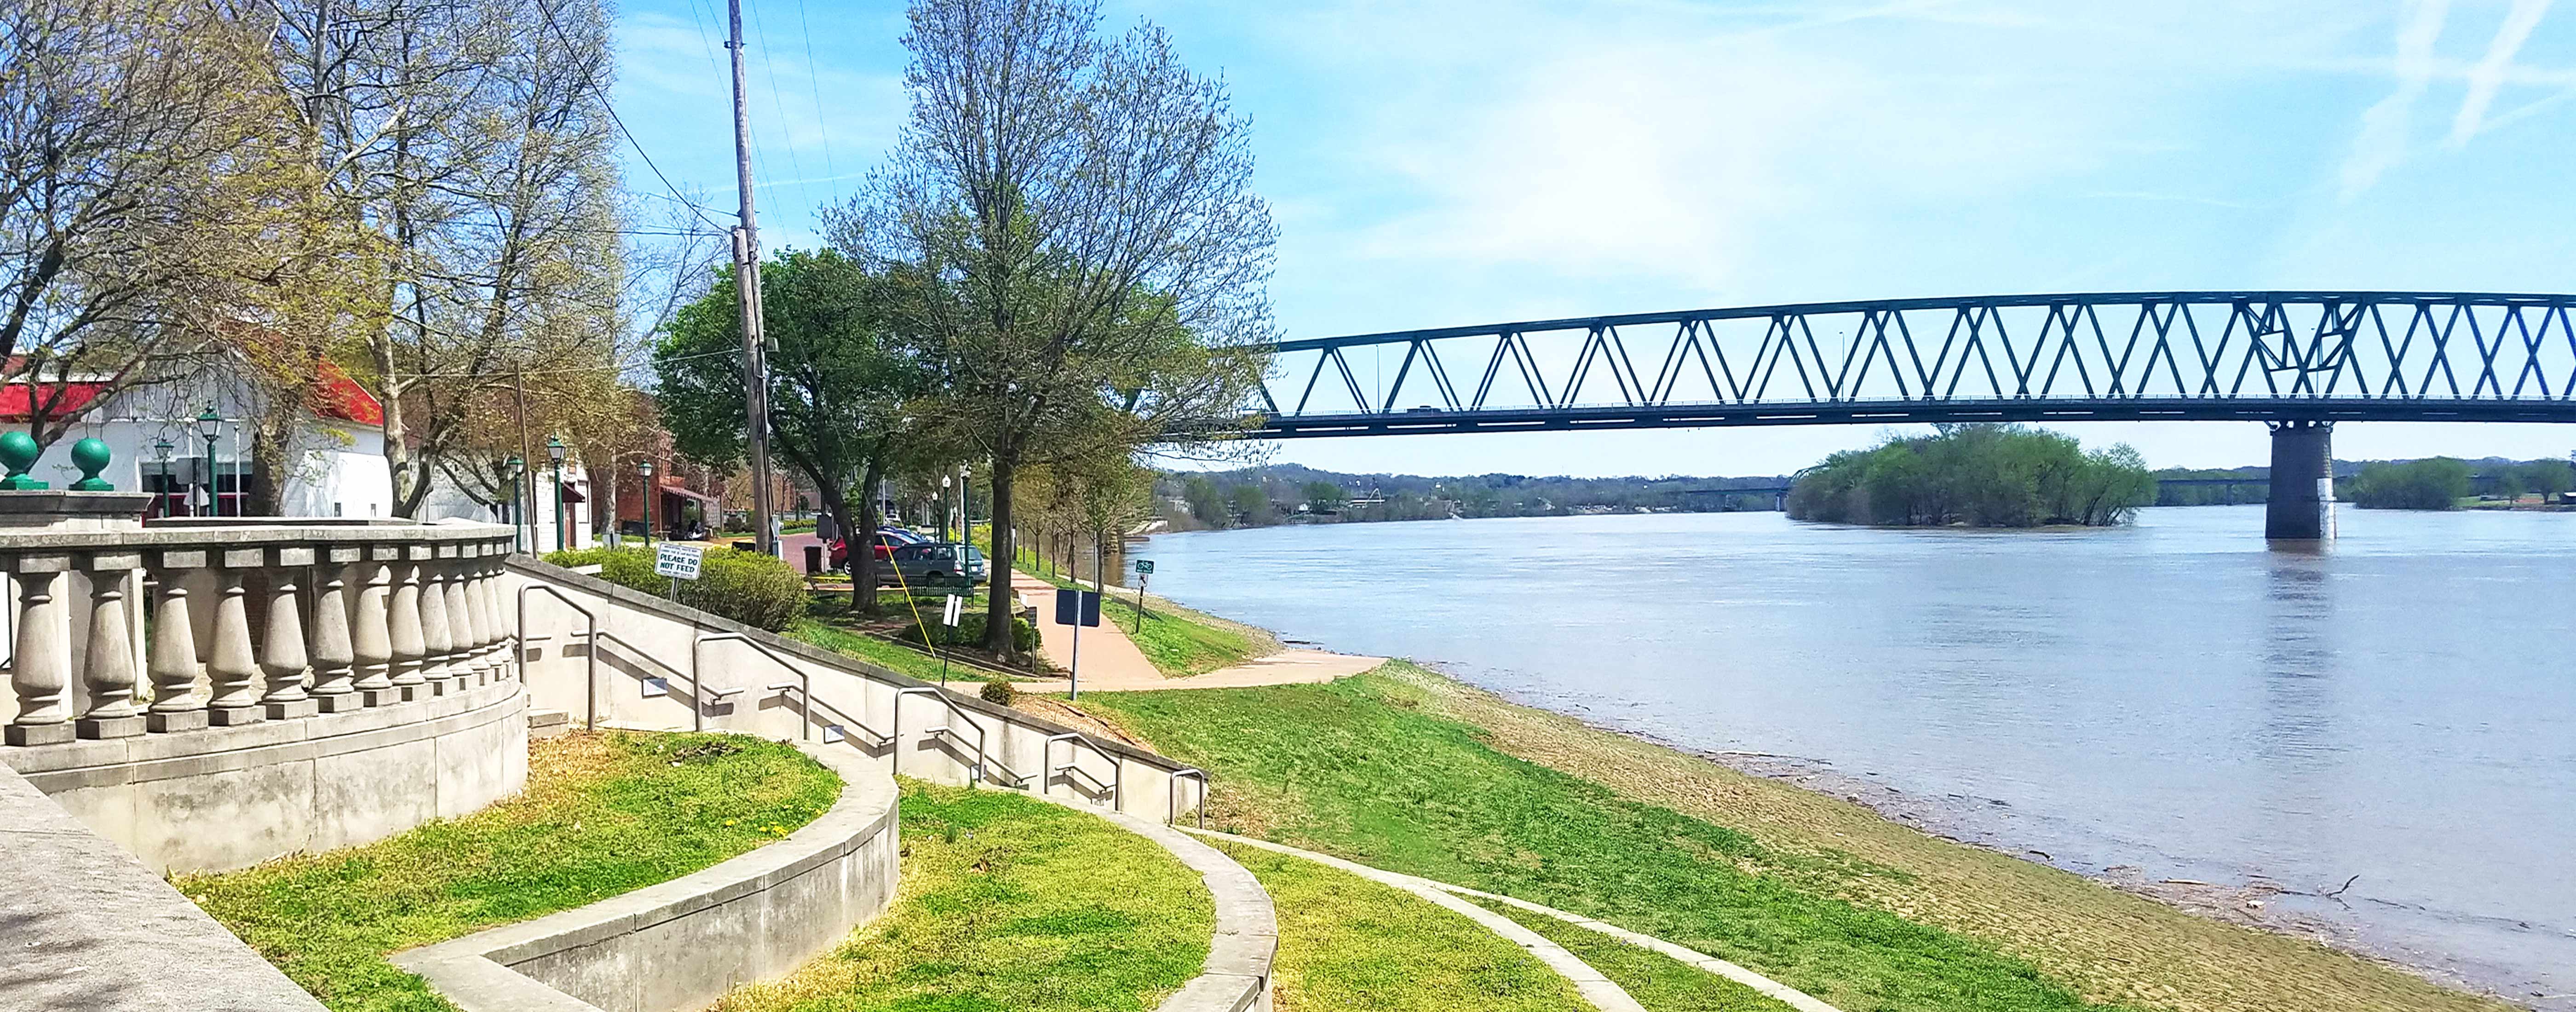 A beautiful view of the Downtown Marietta, Ohio riverfront.